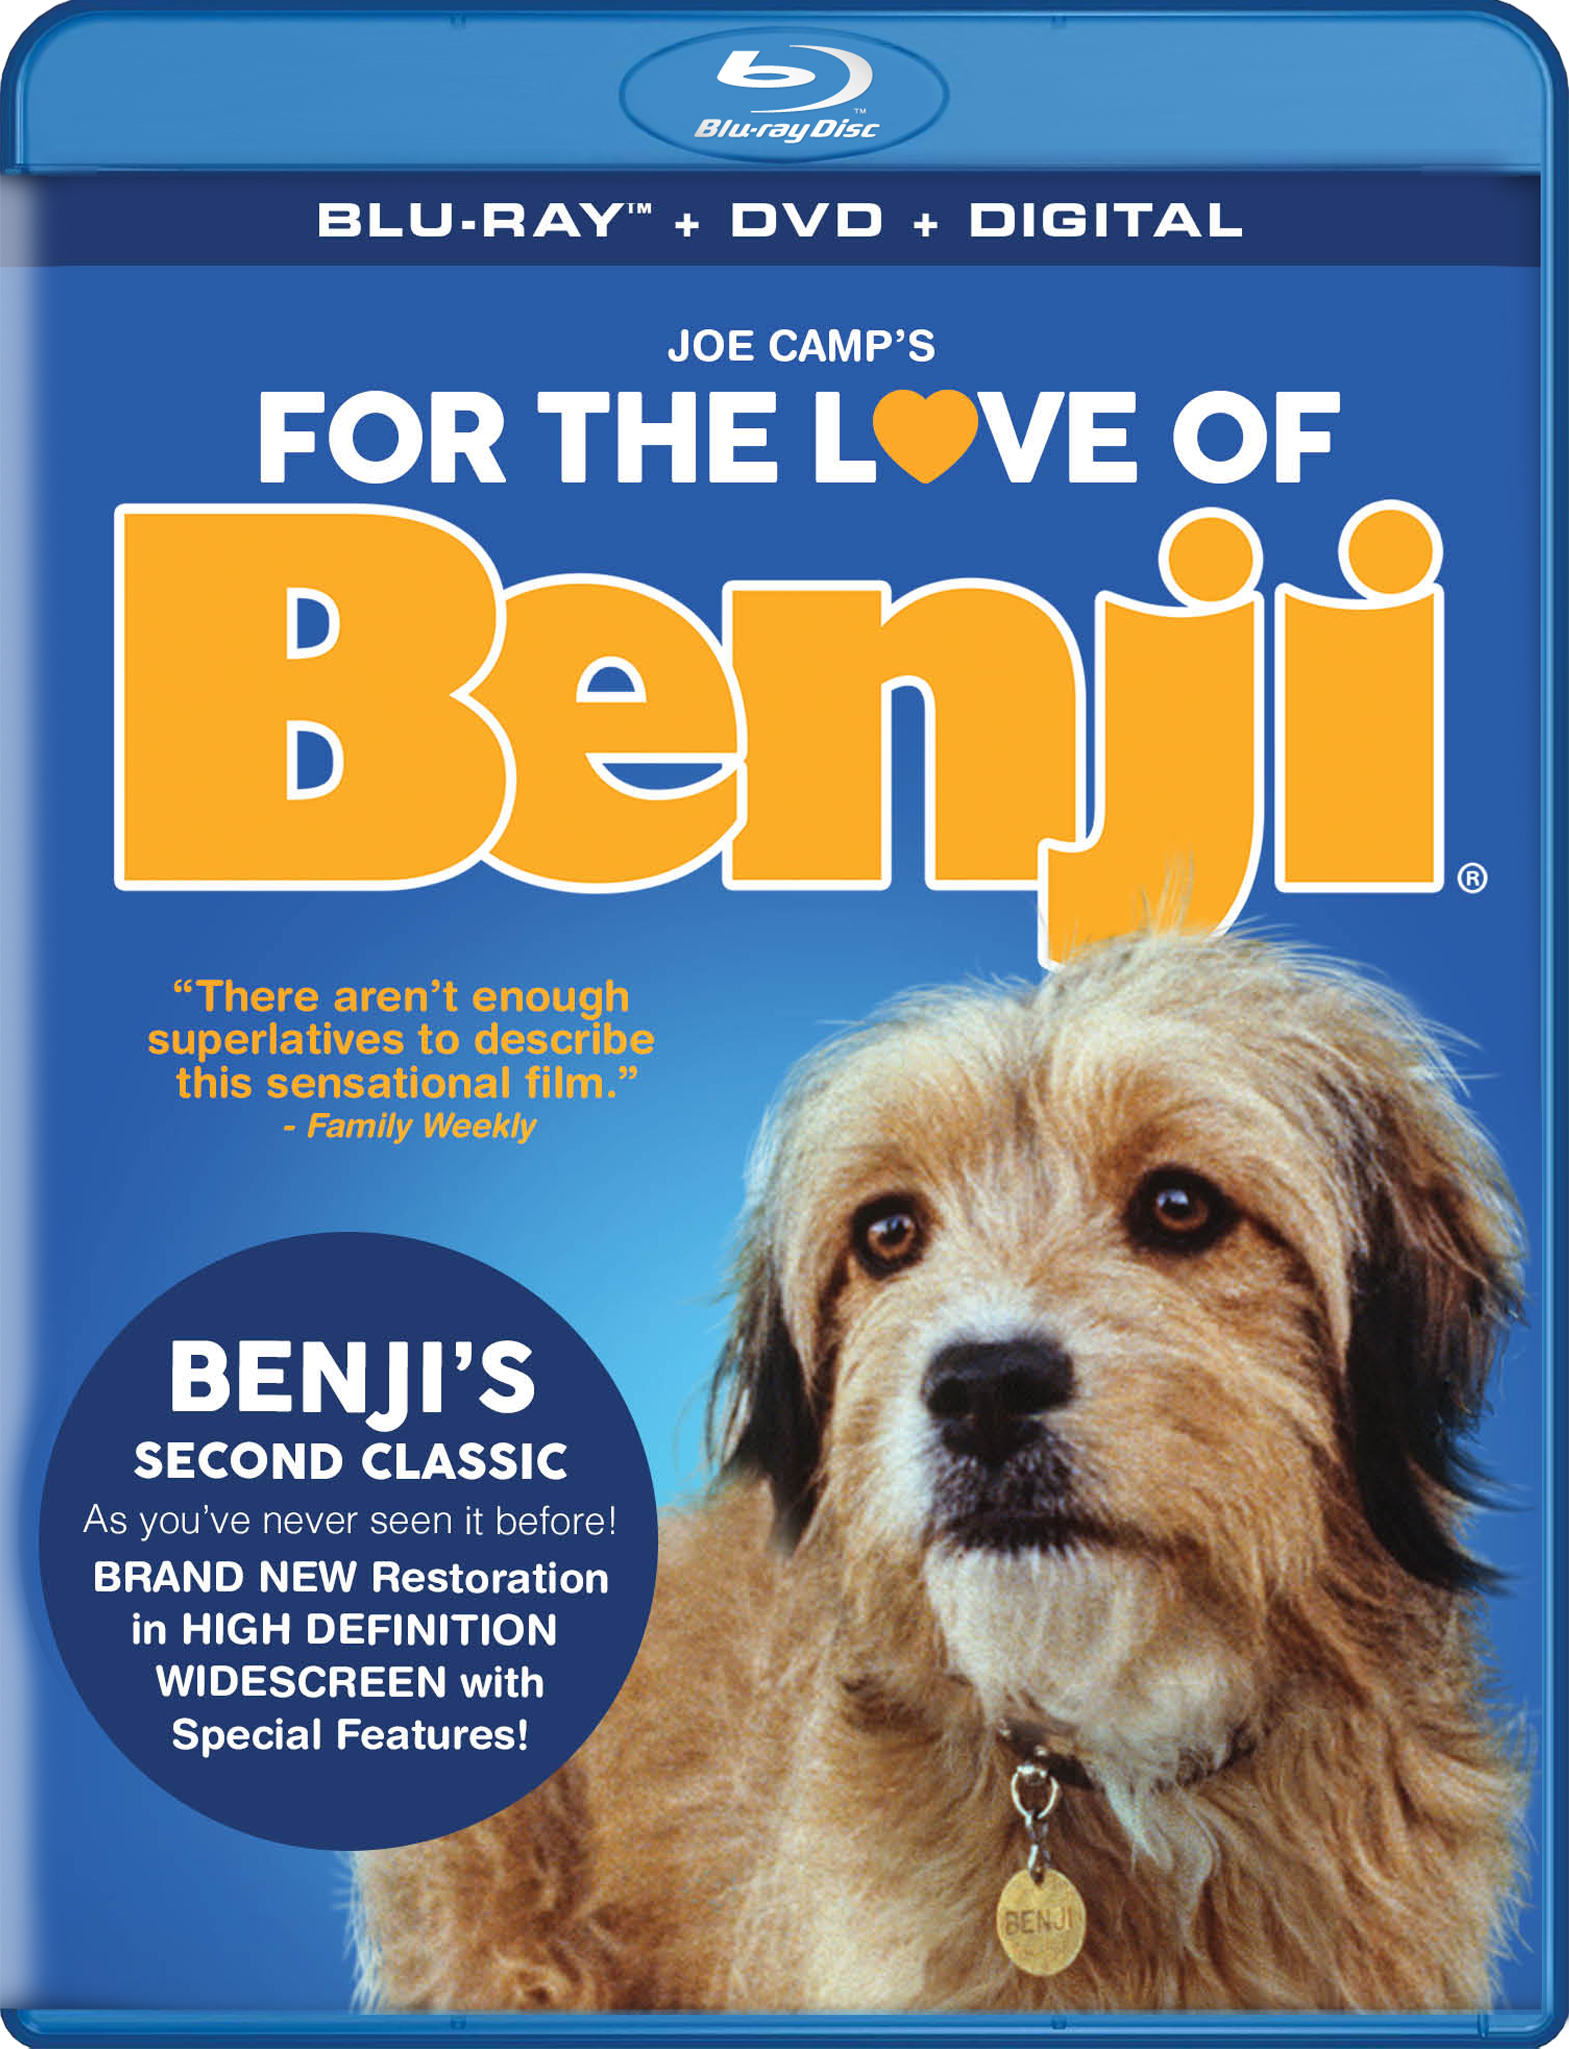 For the Love of Benji [Blu-ray] [1977]